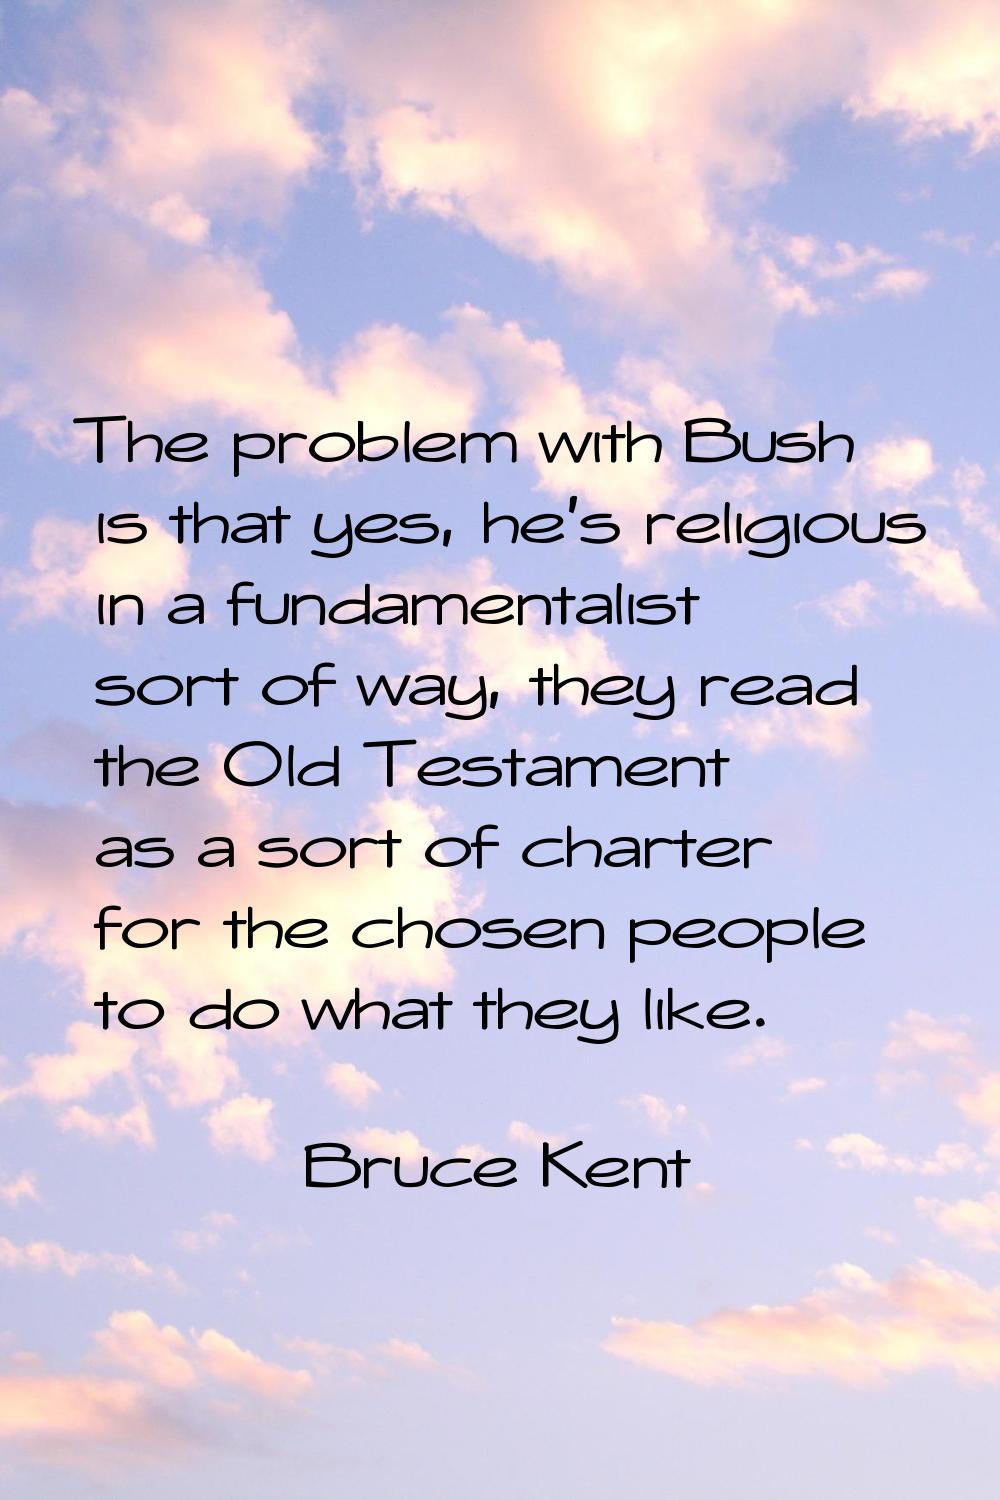 The problem with Bush is that yes, he's religious in a fundamentalist sort of way, they read the Ol